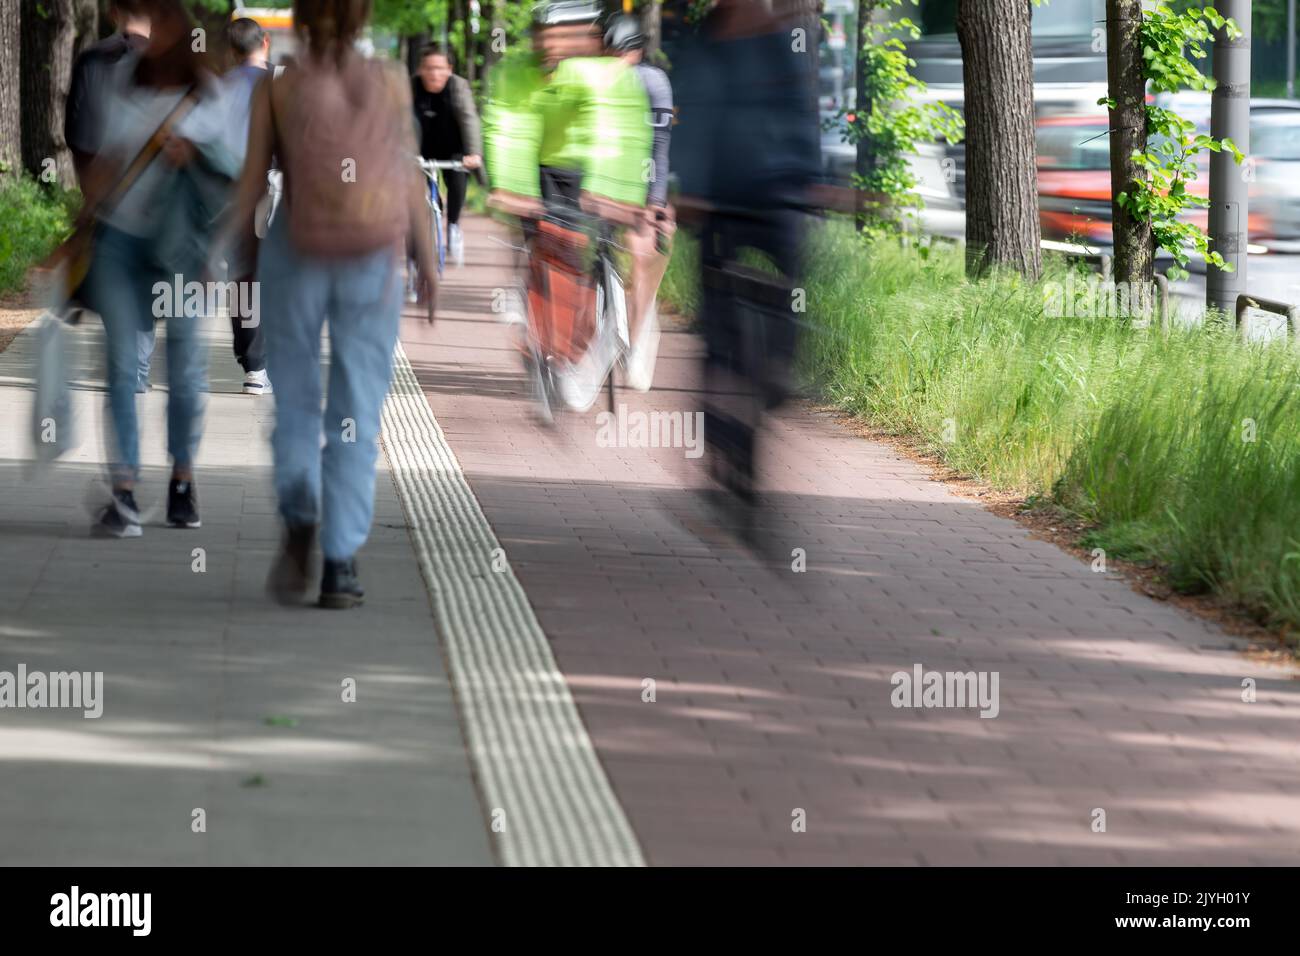 pedestrians and cyclists with motion blur Stock Photo